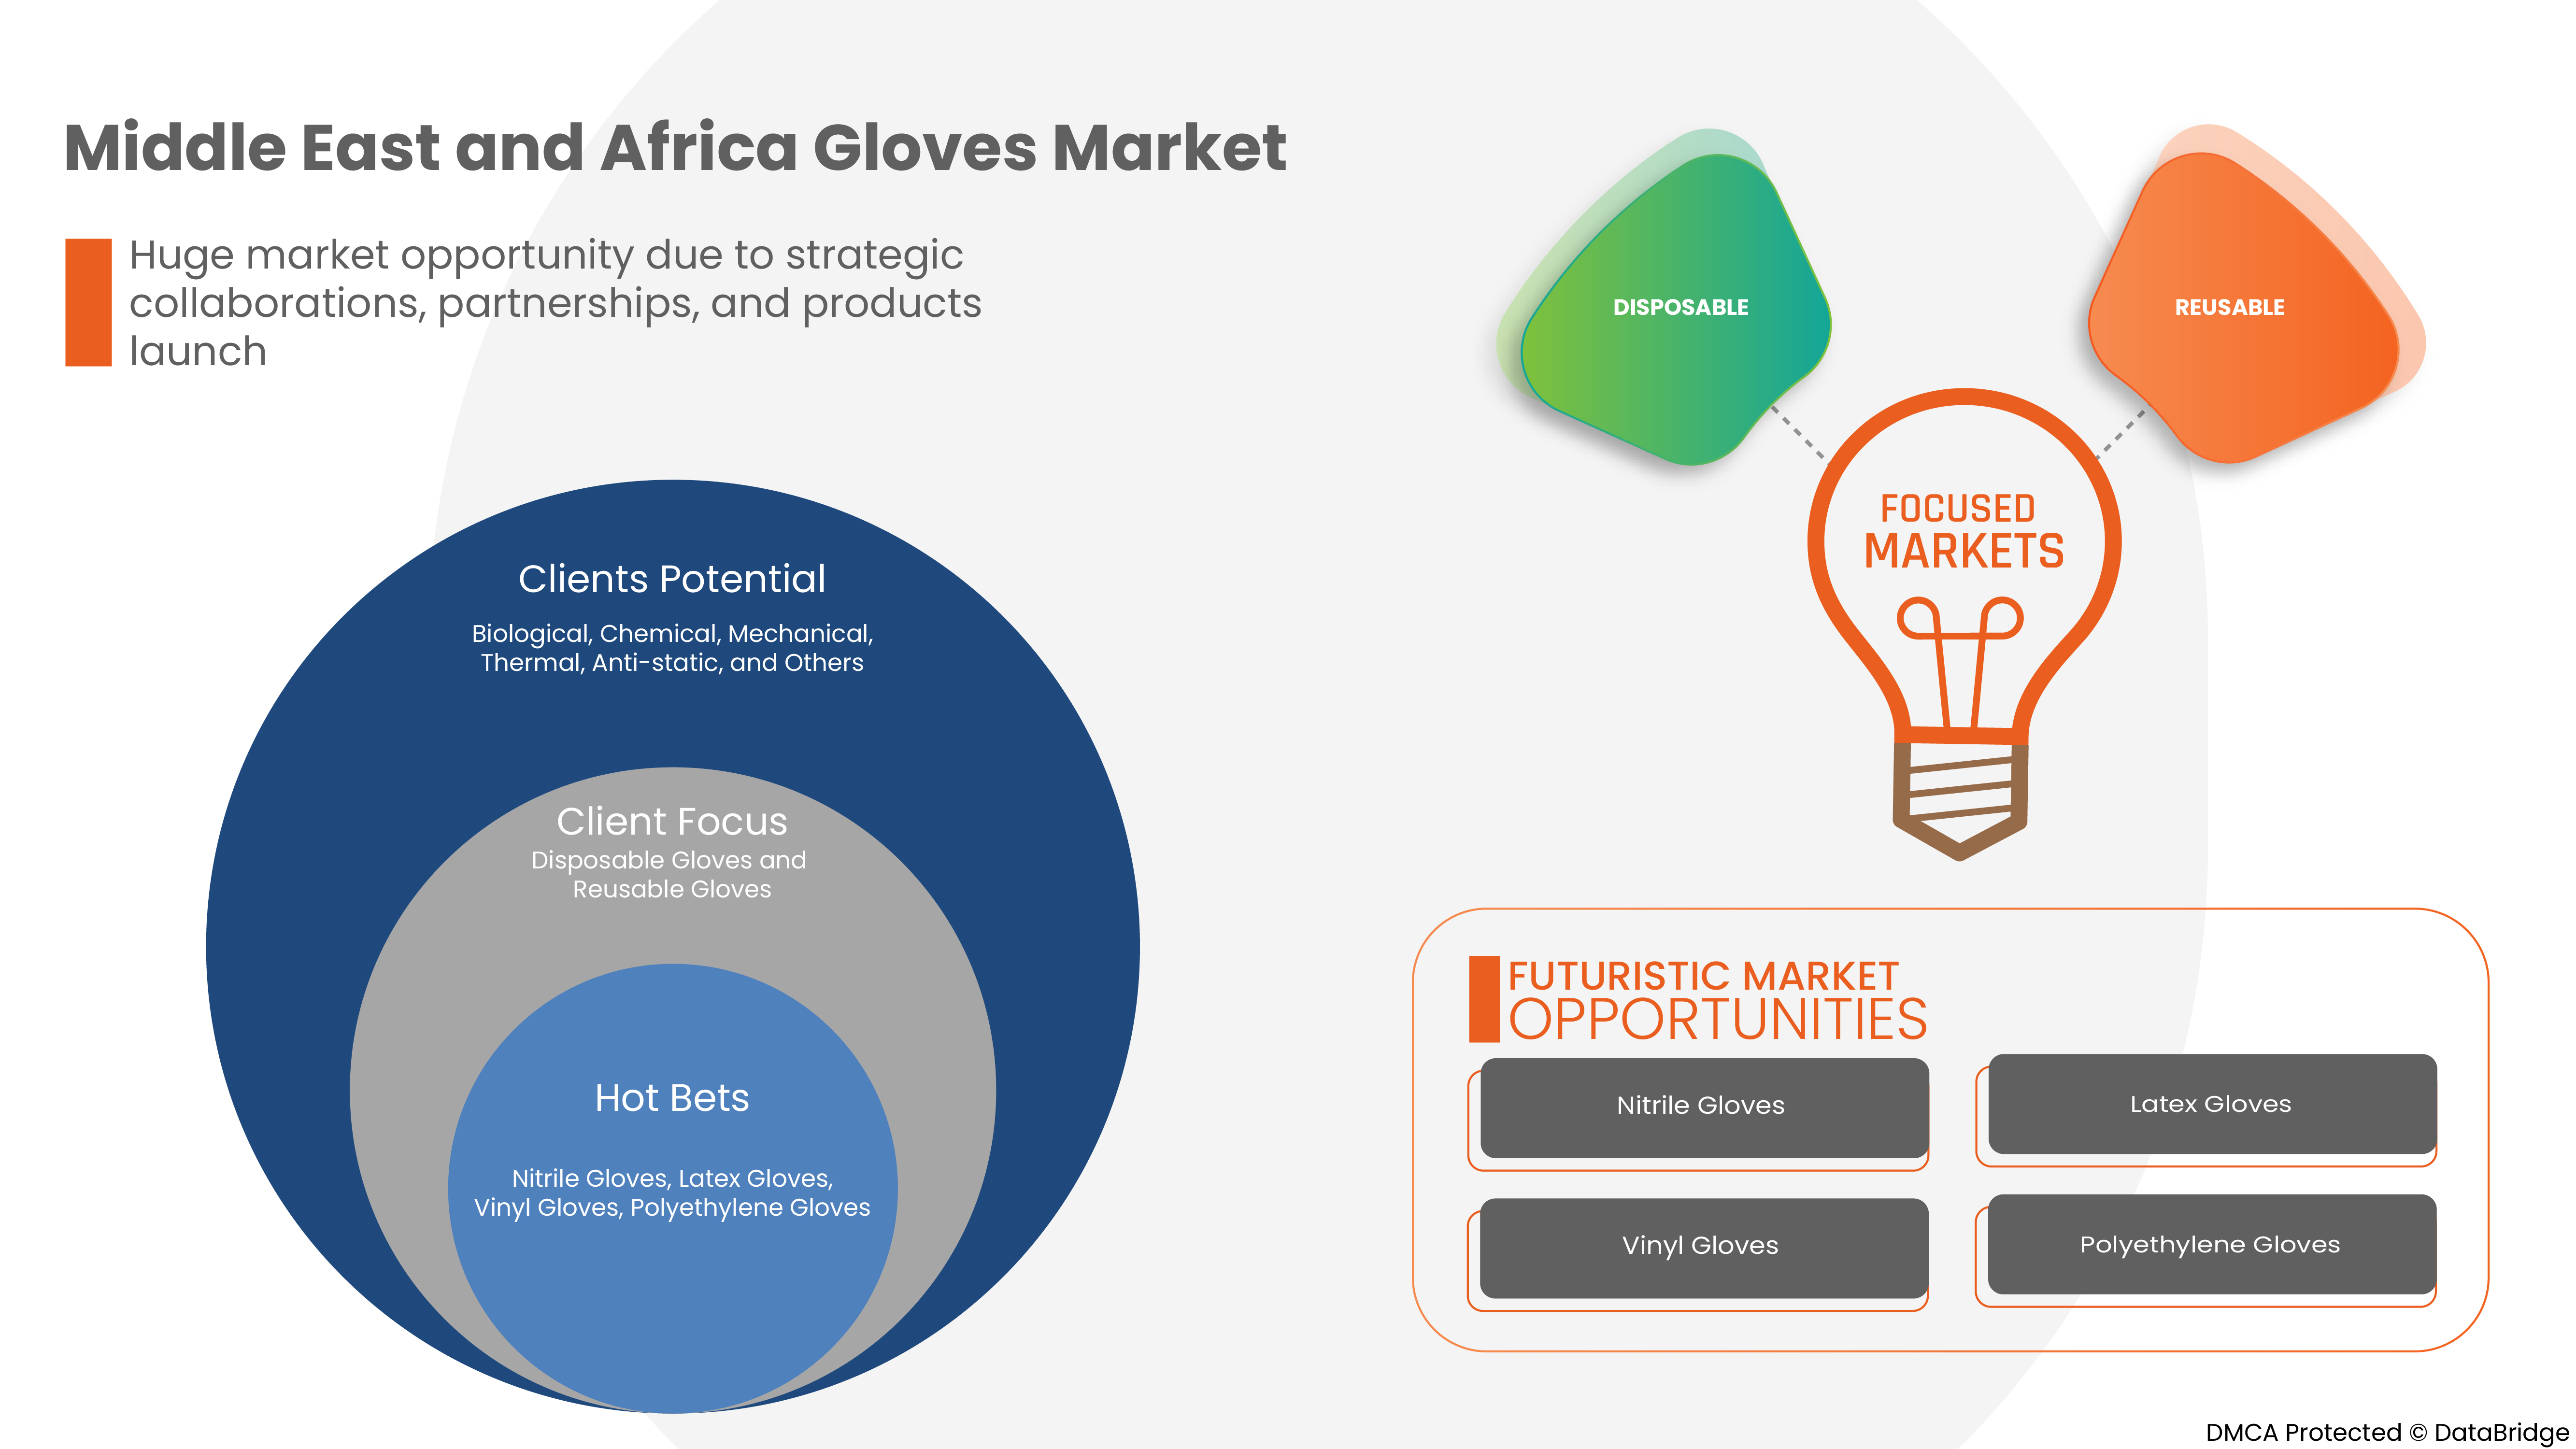 Middle East and Africa Gloves Market